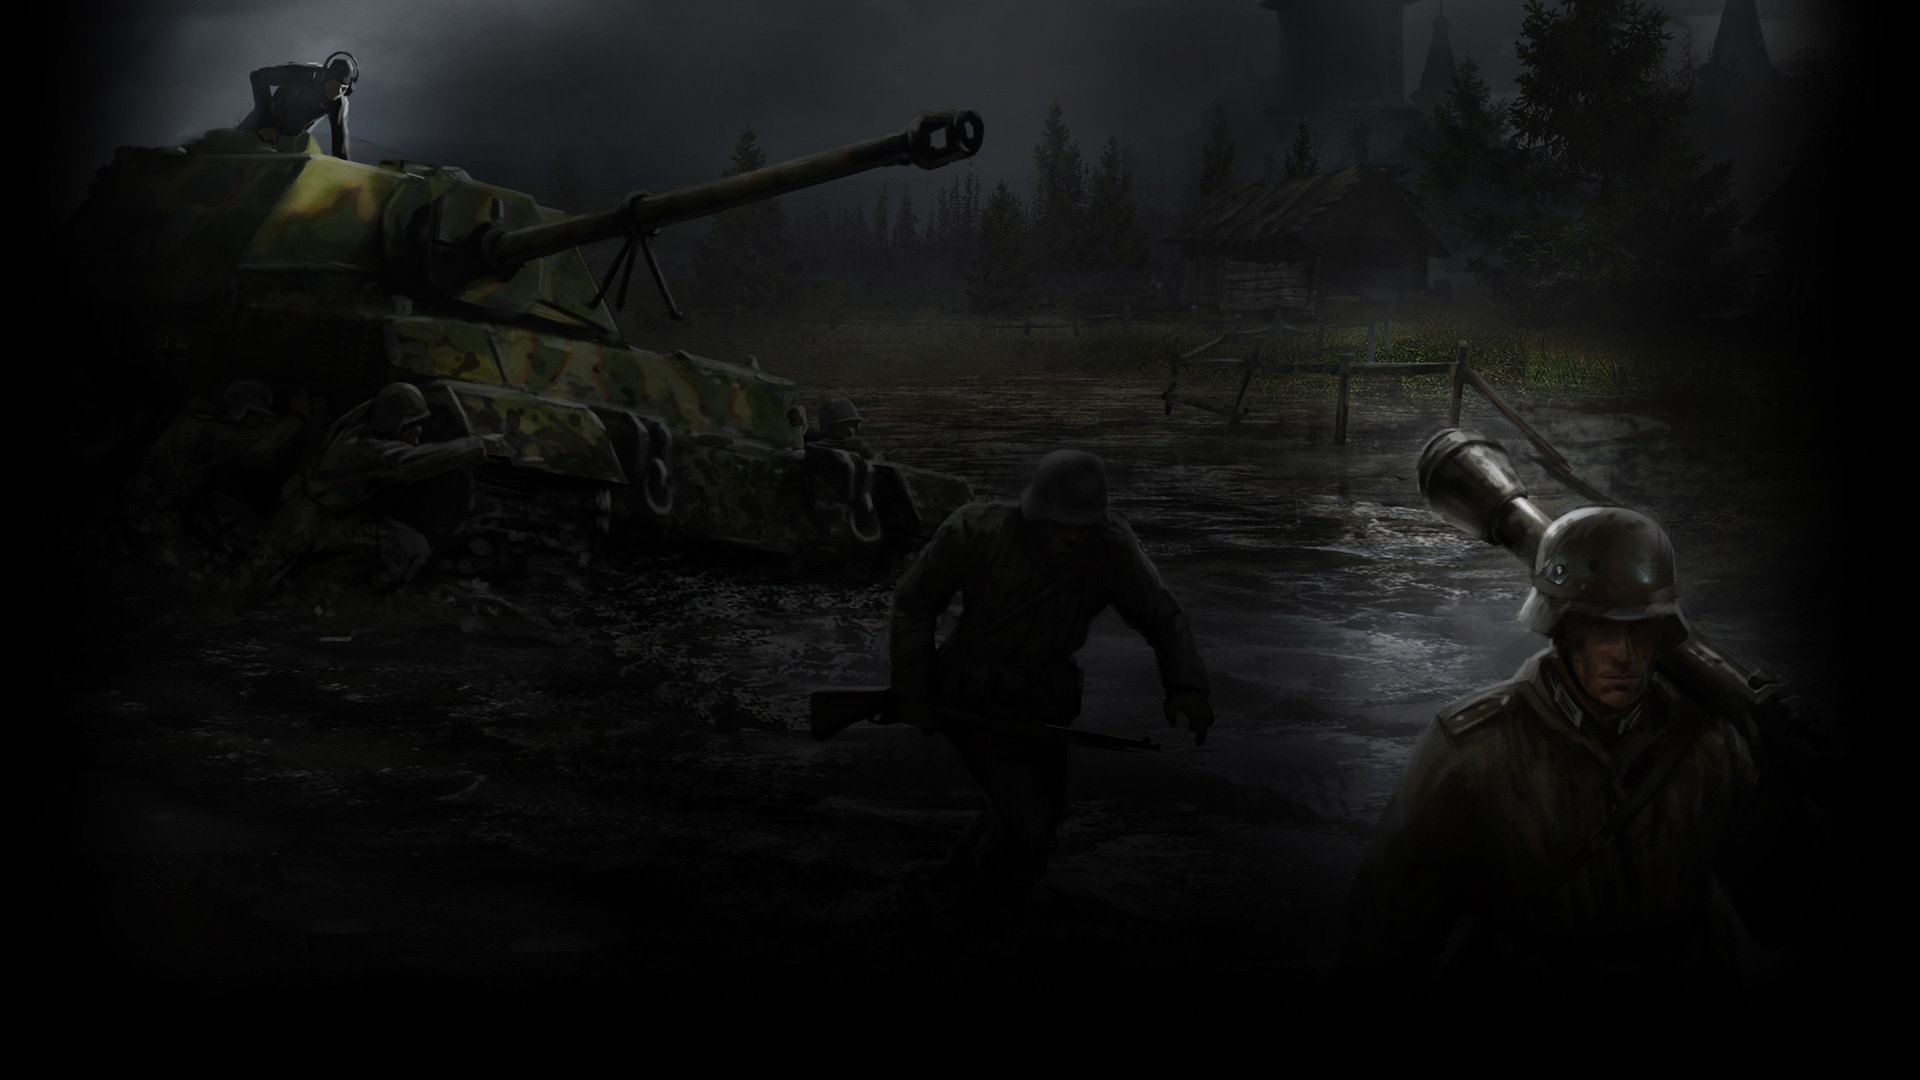 Awesome Company Of Heroes 2 free background ID:113563 for full hd 1920x1080 desktop